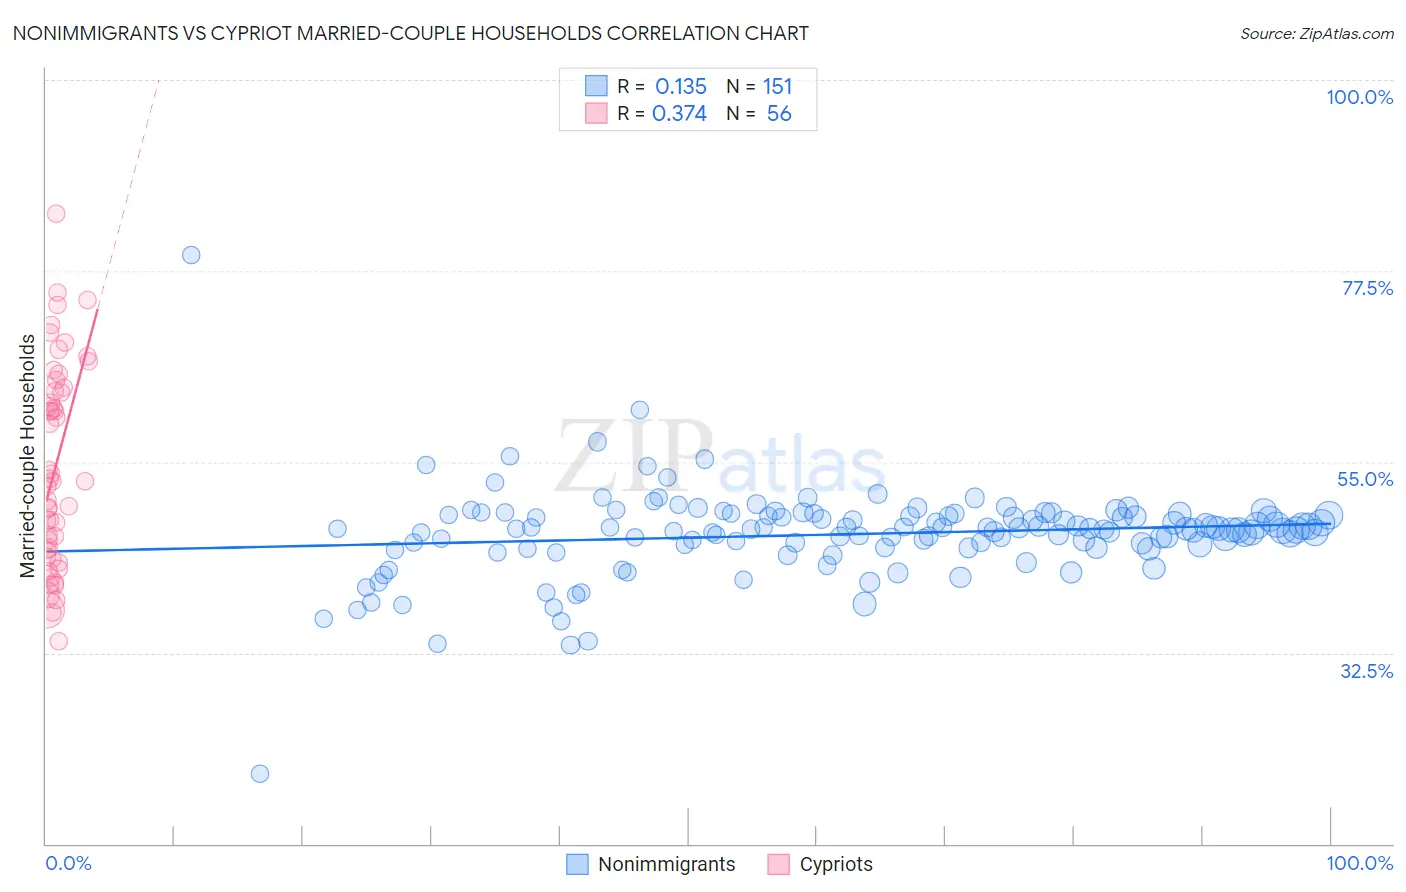 Nonimmigrants vs Cypriot Married-couple Households